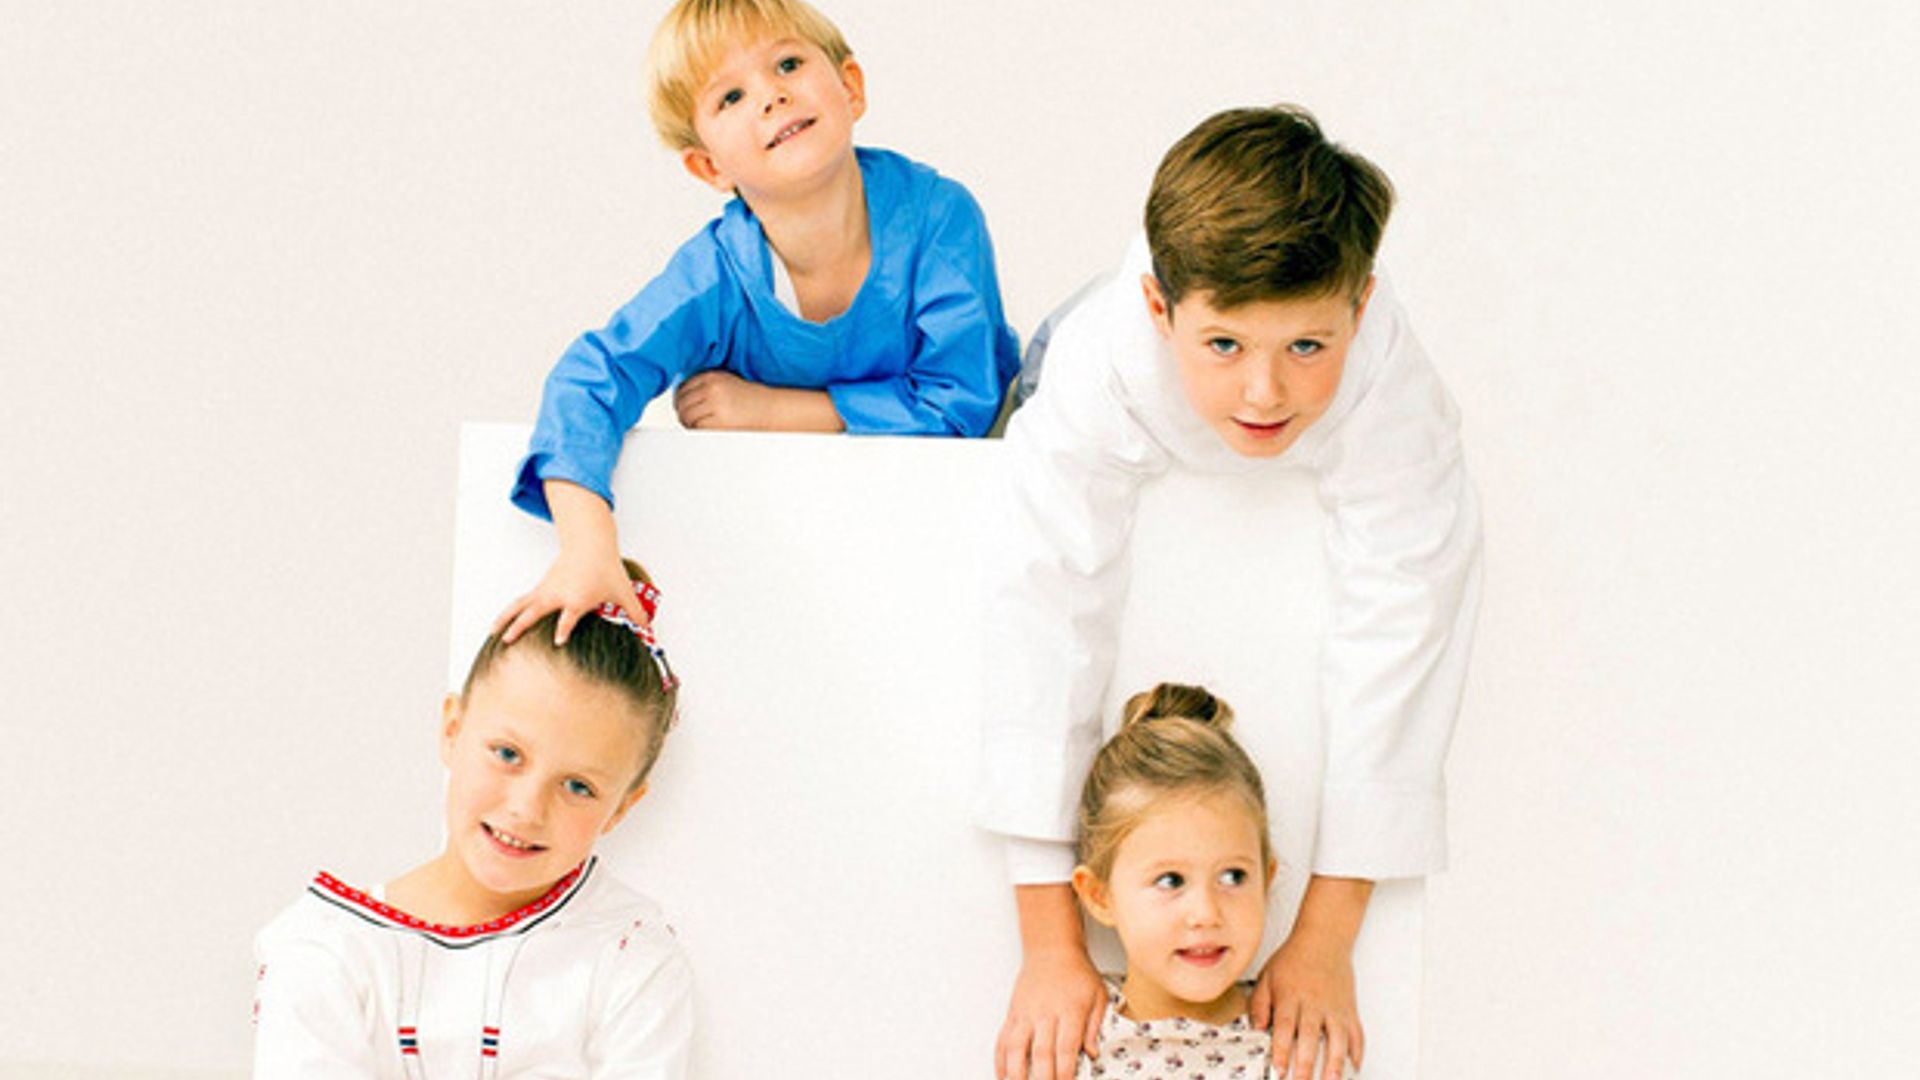 The Danish royal kids show off their Christmas tree decorations